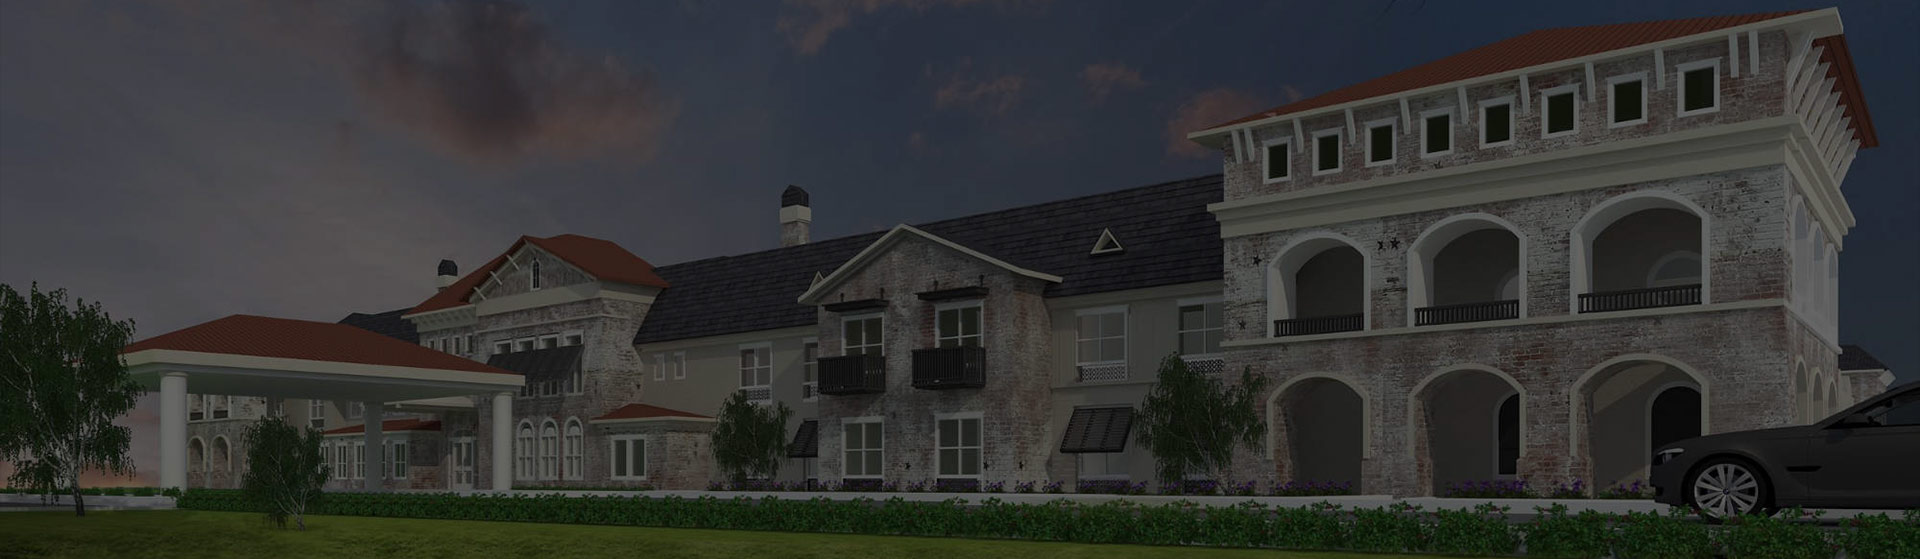 New Orleans Area Quality Senior Living Project